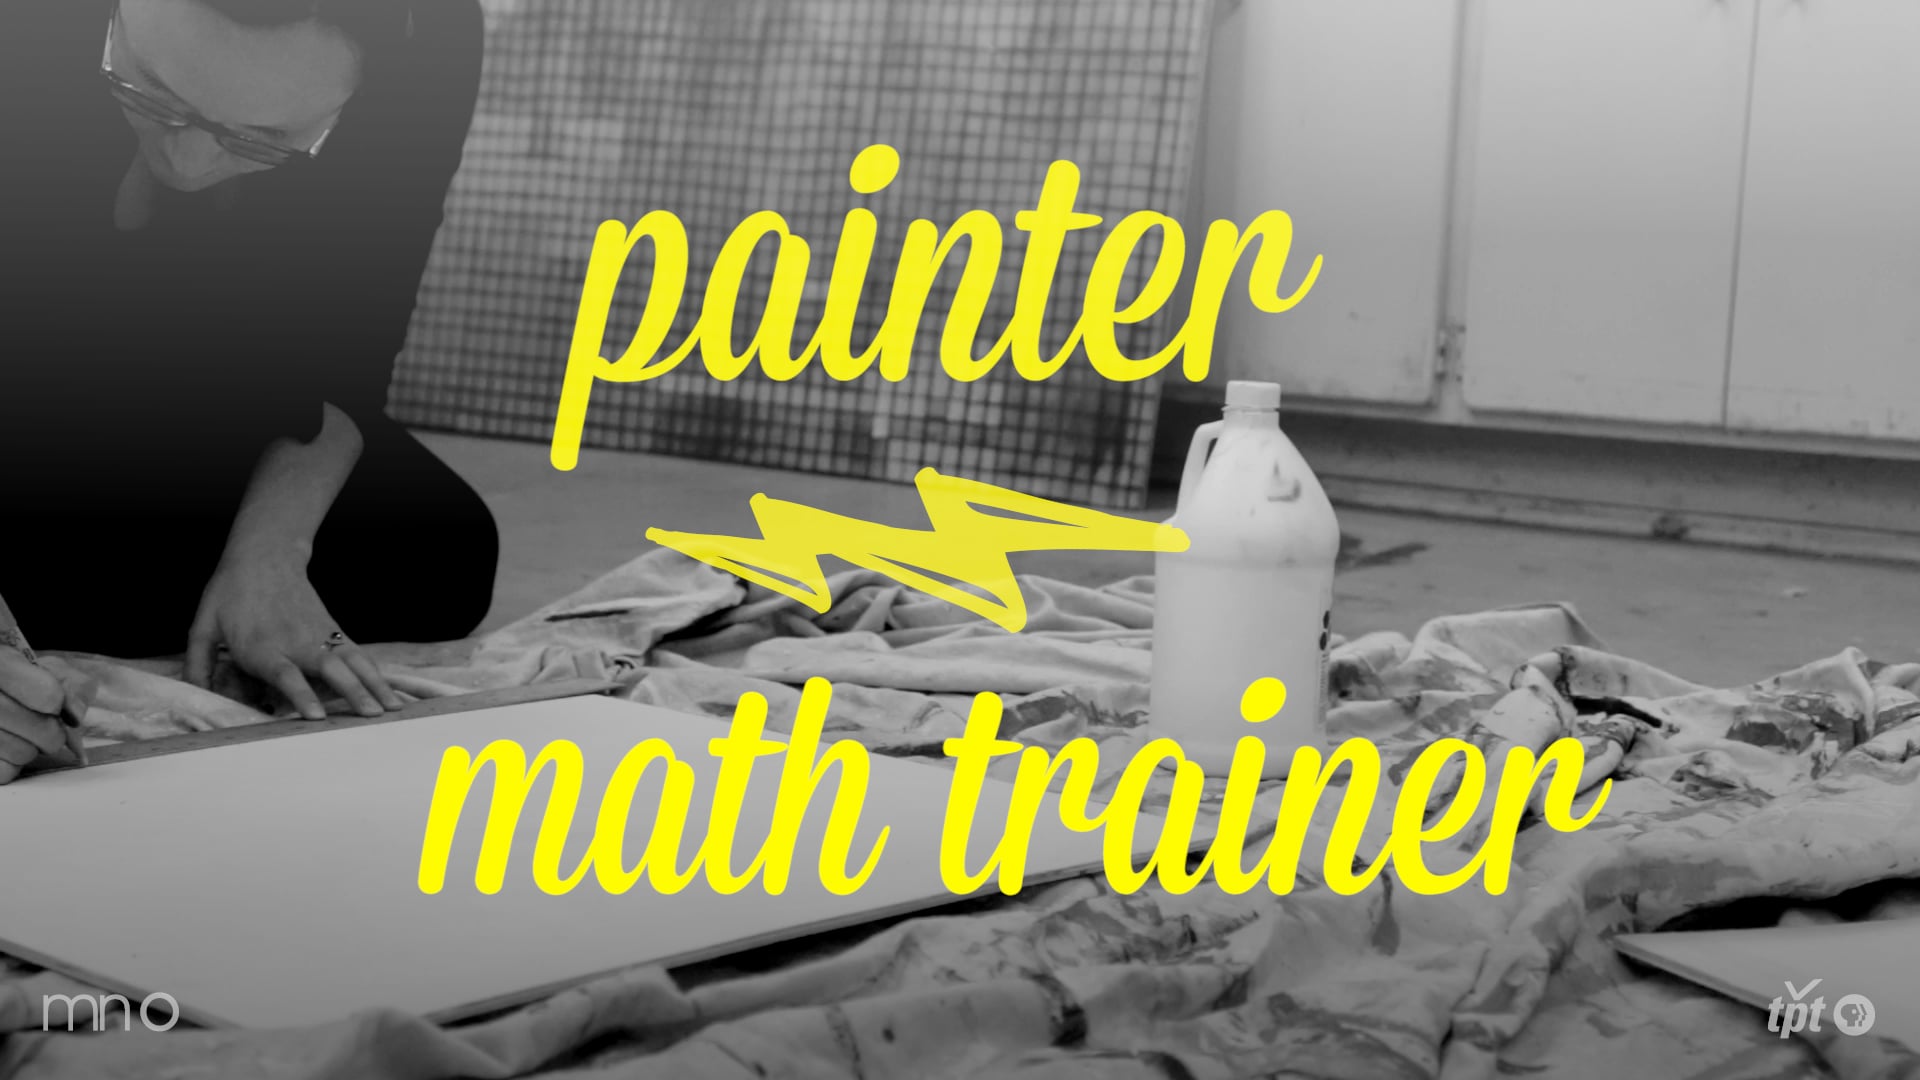 Artist Day Jobs: Emily Lynch Victory - Painter/Math Trainer